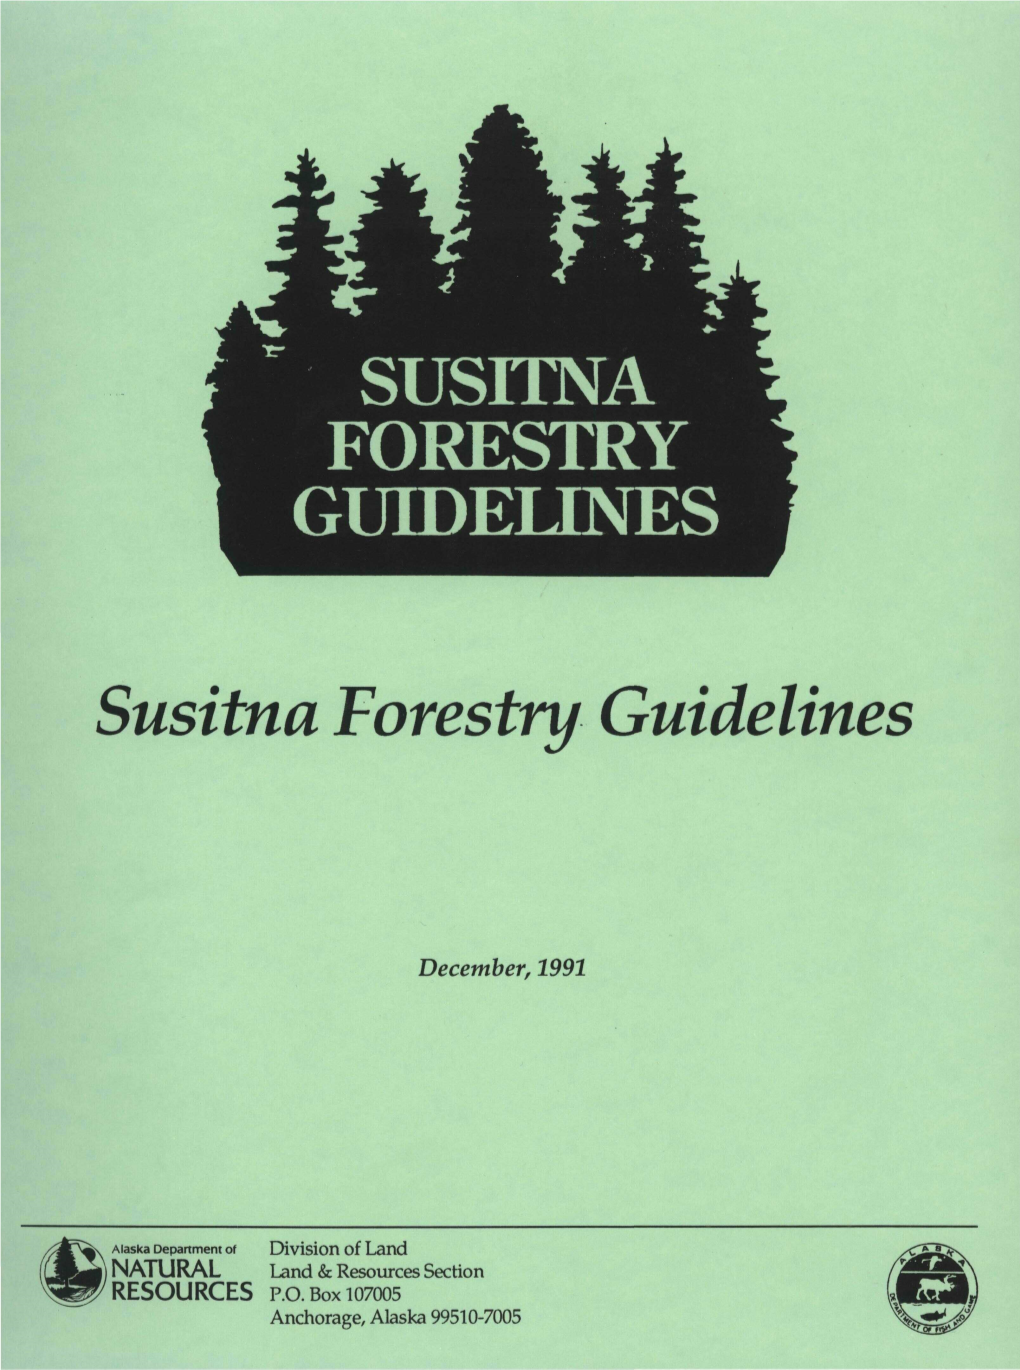 Susitna Forestry Guidelines